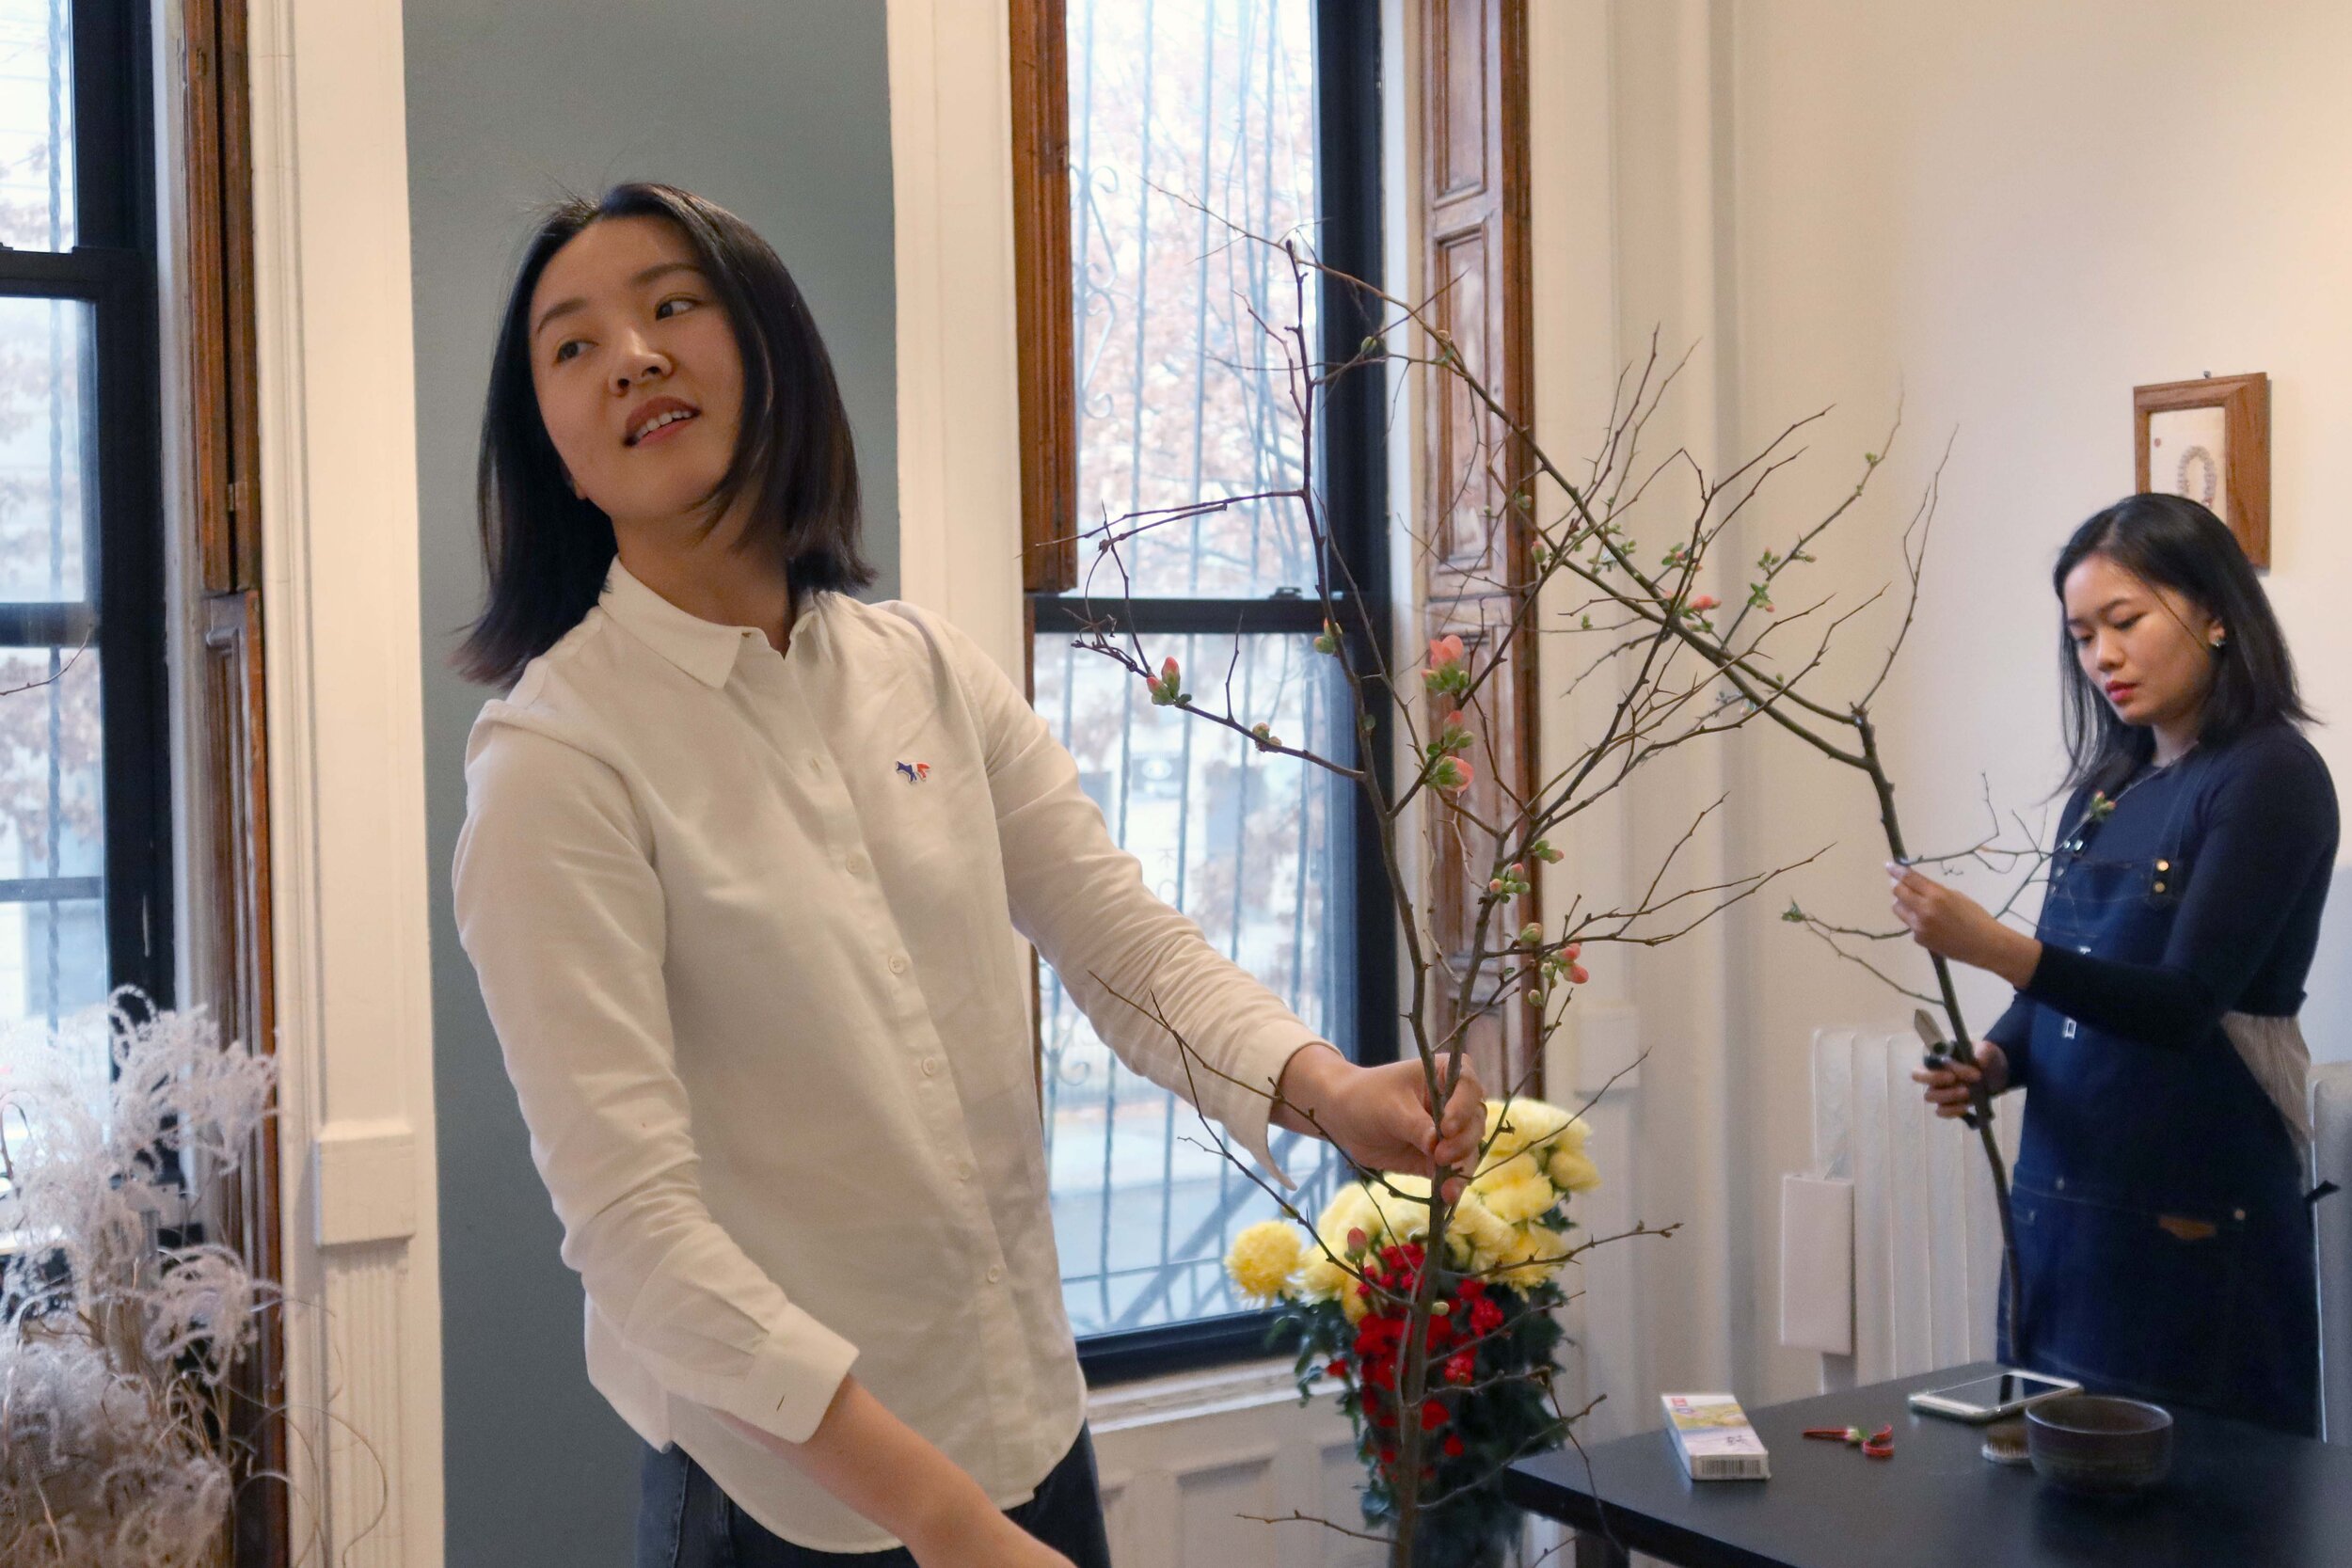   A Taste of Ikebana  at Fou Gallery (12.14.2019), photo by Jing Lin, courtesy Fou Gallery. 